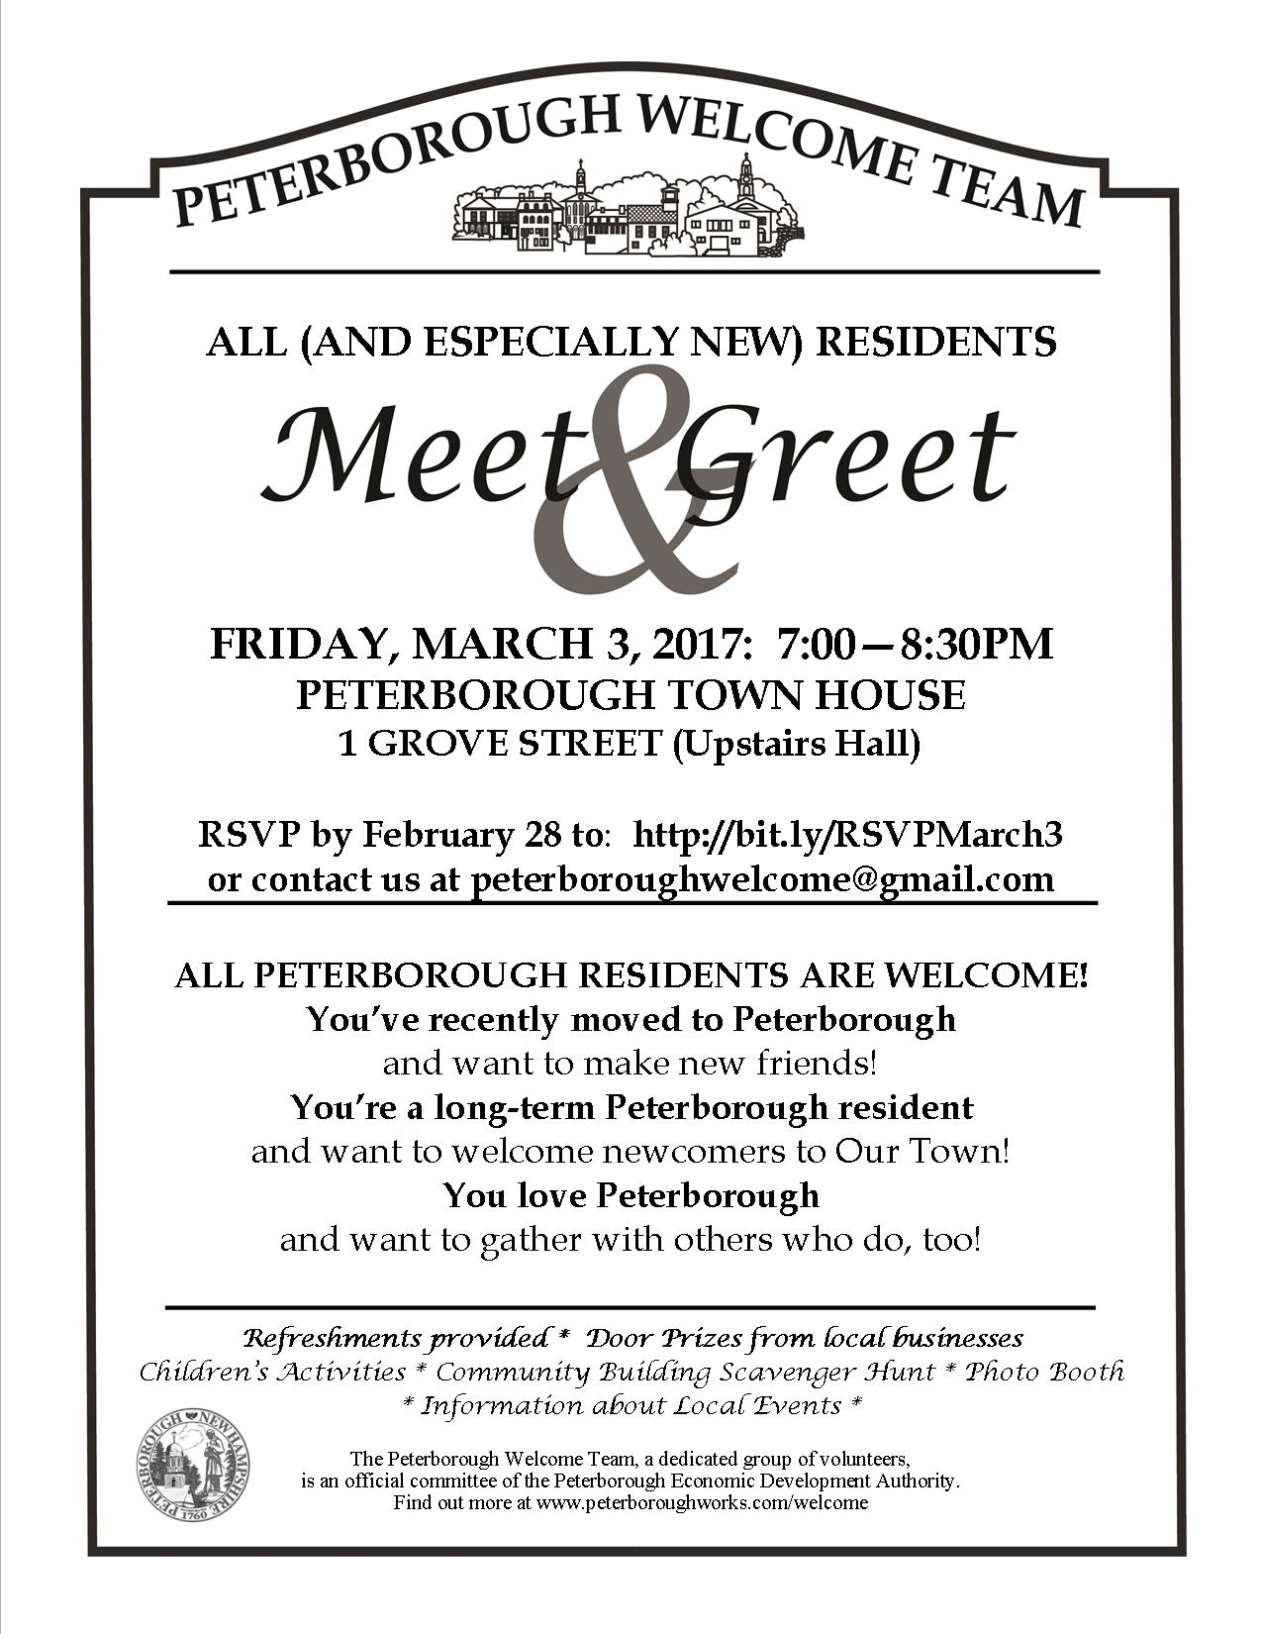 Meet And Greet Flyer March 3 | Peterborough Nh Economic Development Throughout Meet And Greet Flyers Templates